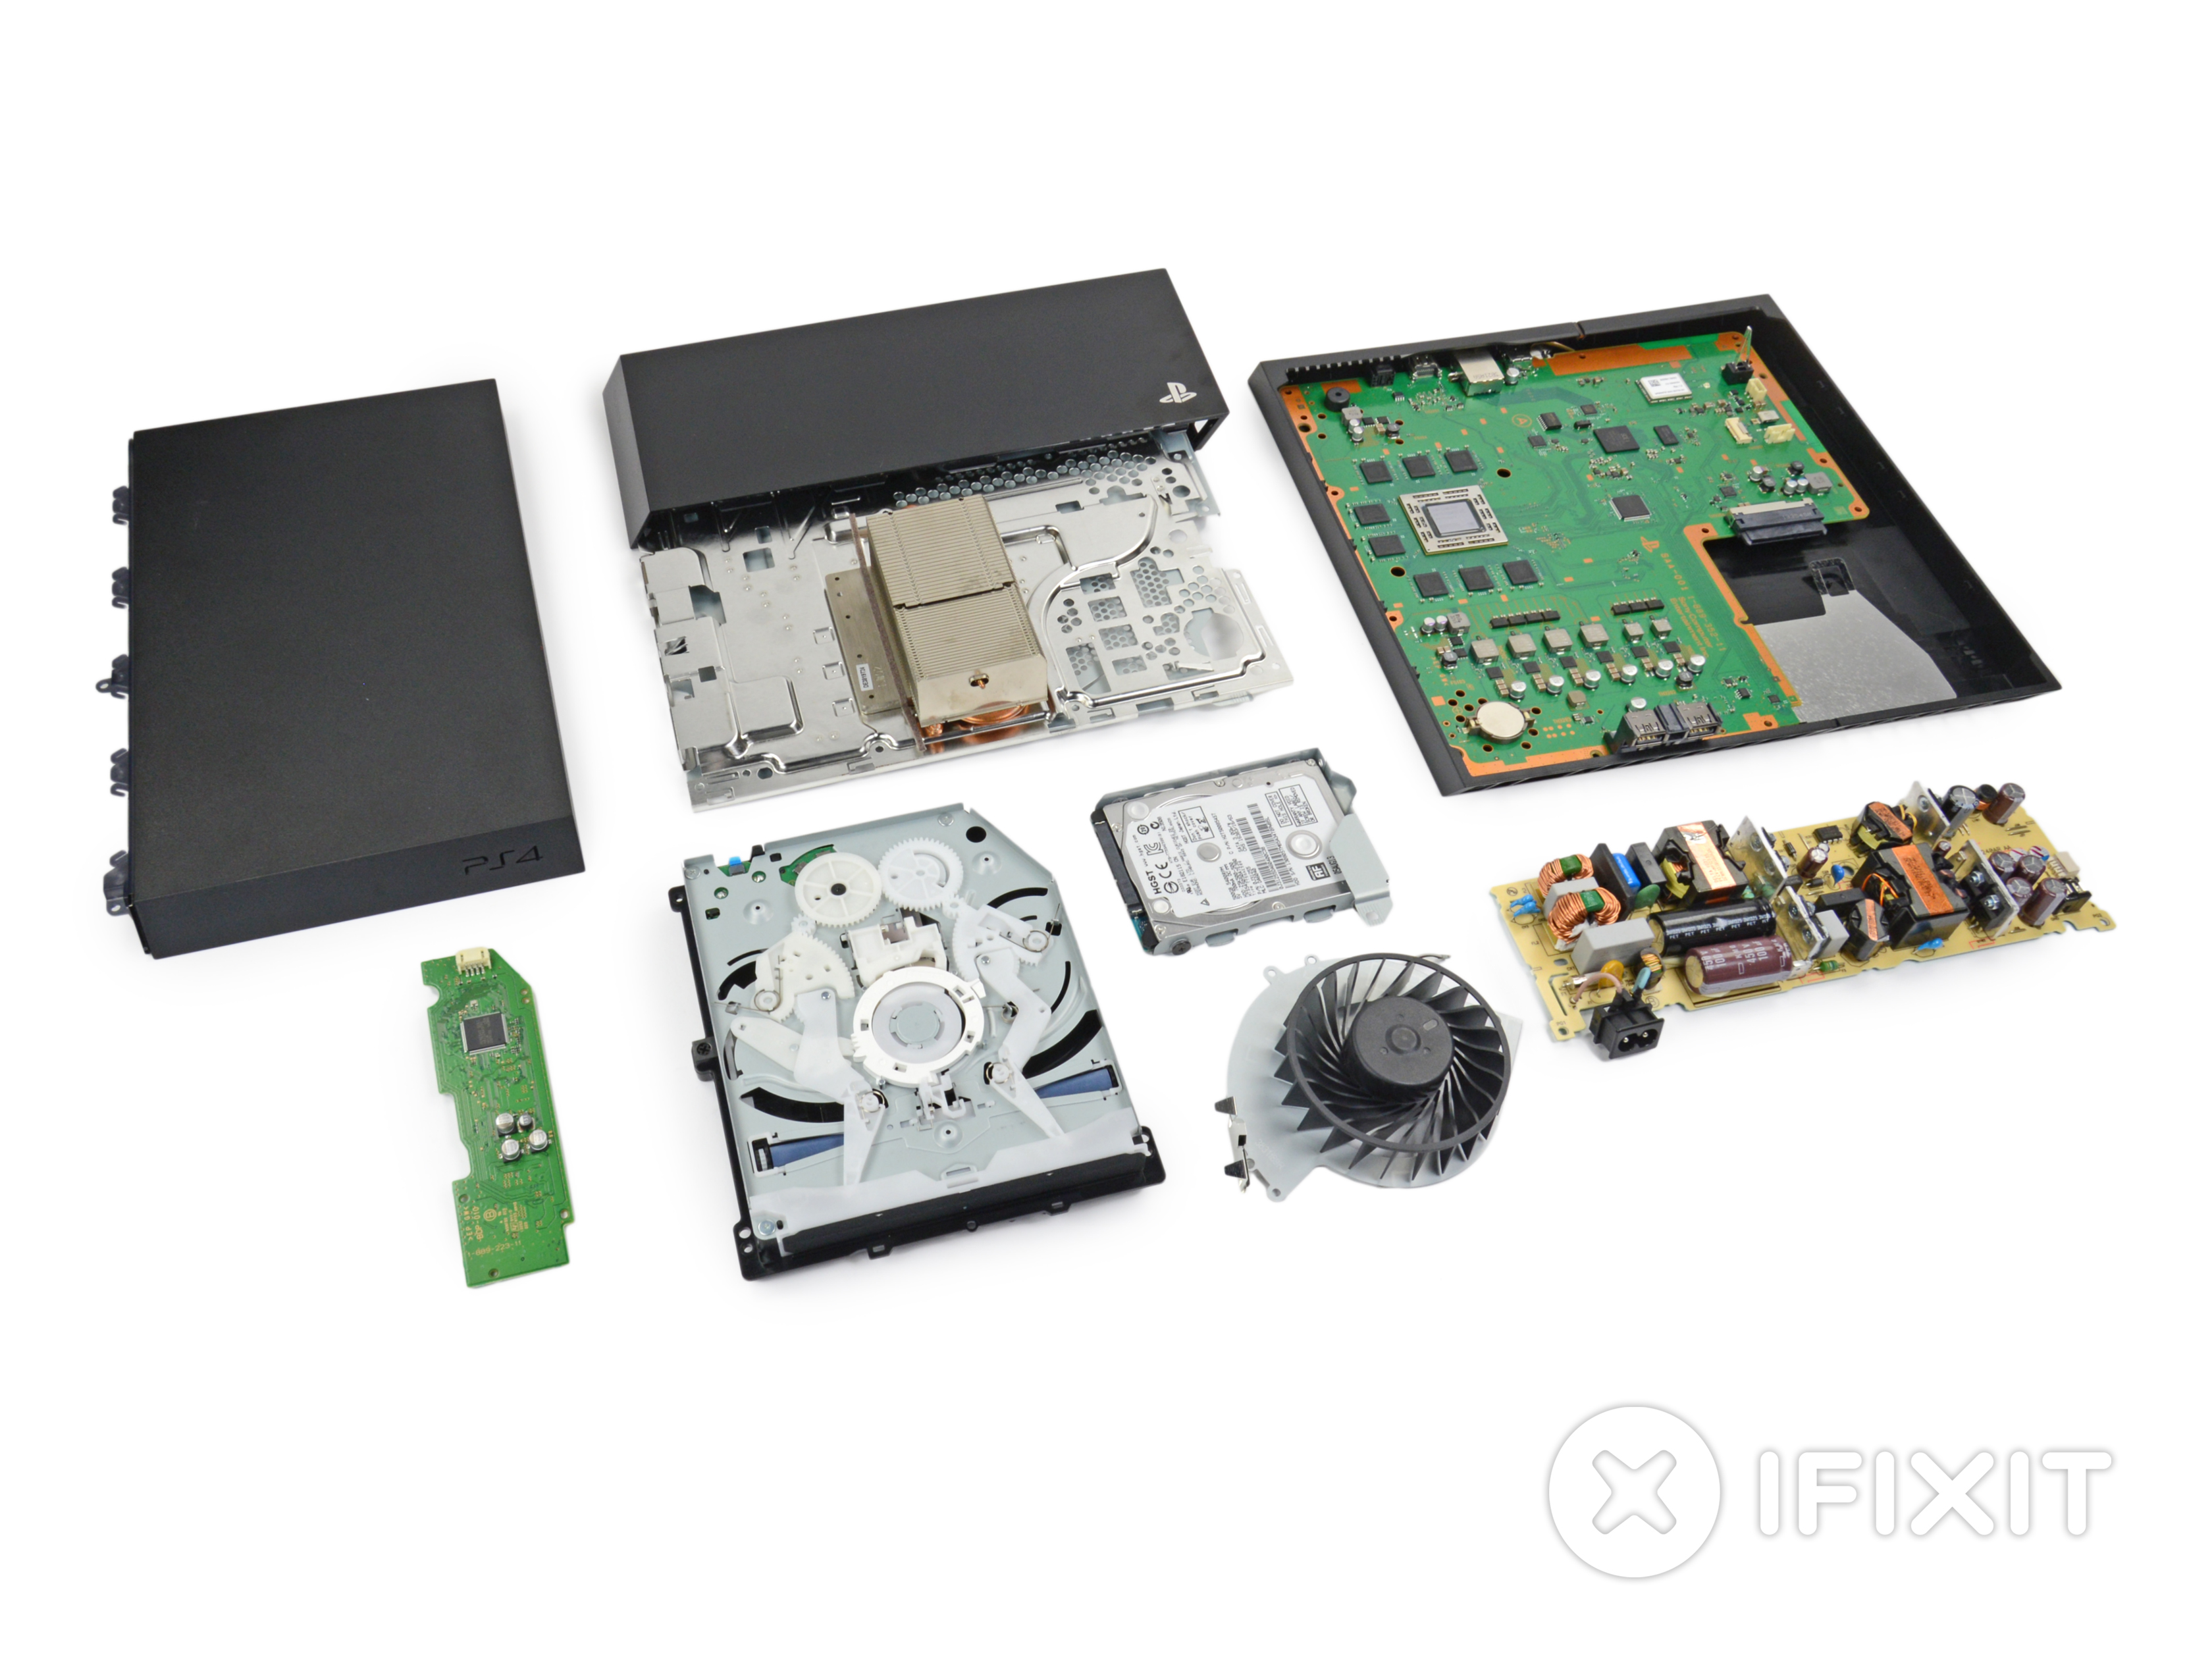 iFixit opens the Playstation 4—replaceable hard drive earns props Ars Technica